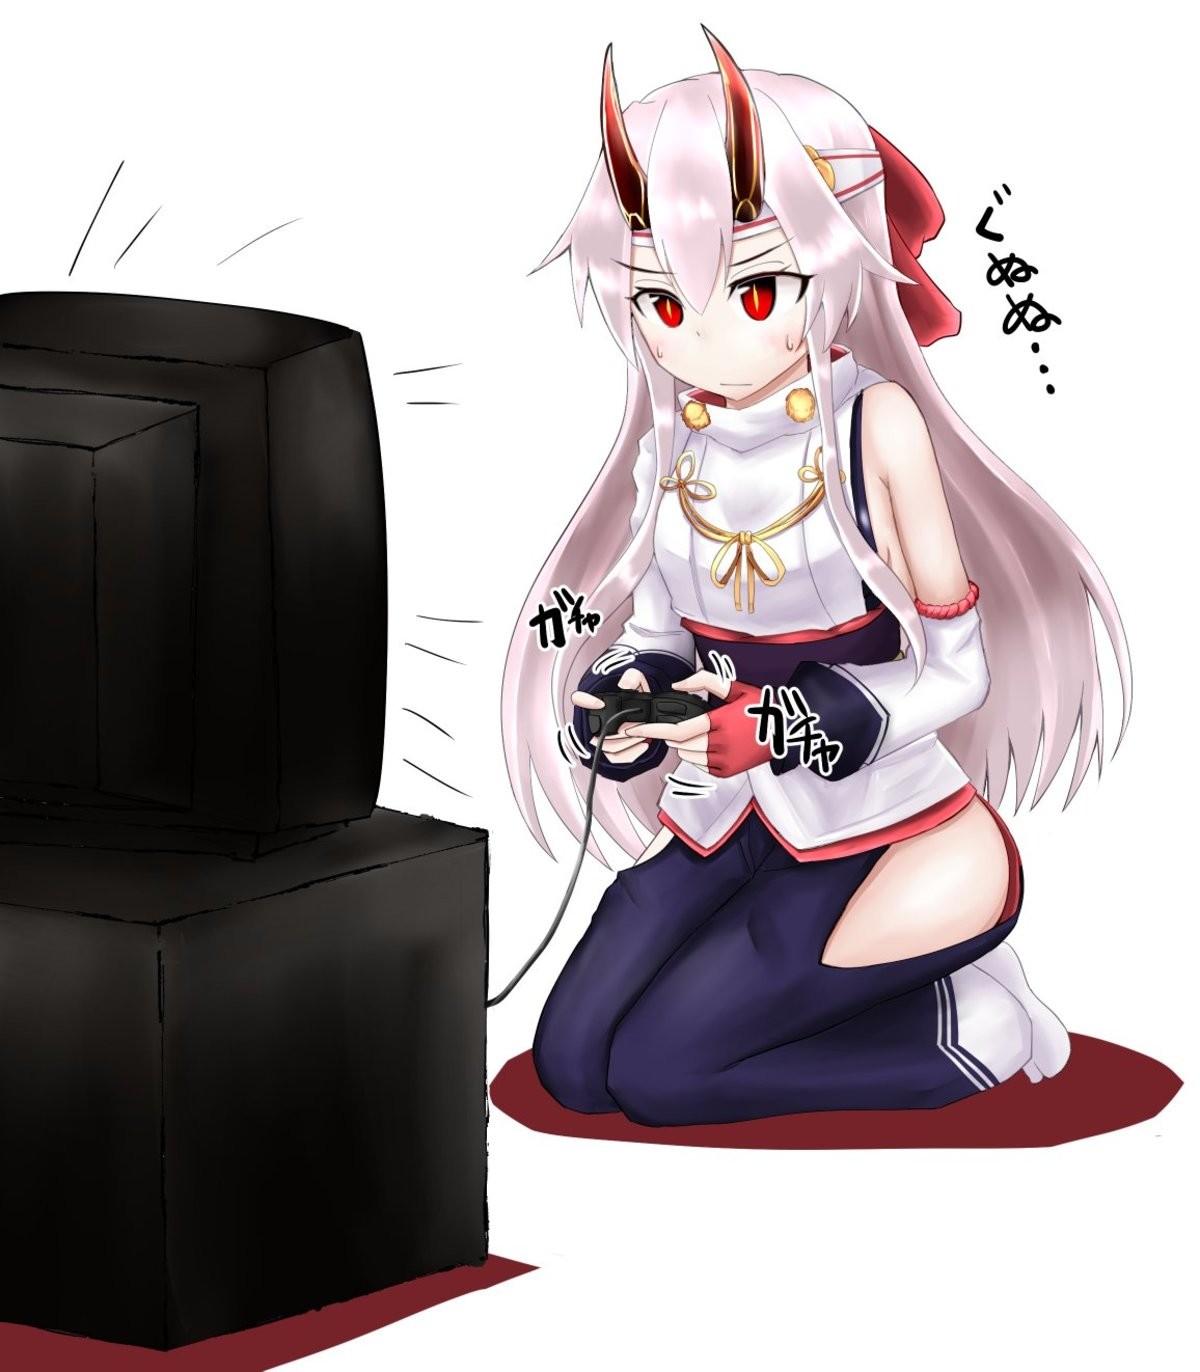 Fate Comp: Gaming Oni Samurai Girl. join list: TheGreatCompilationList (205 subs)Mention History join list:. Those horns are impressive. Thumbed and the headpat